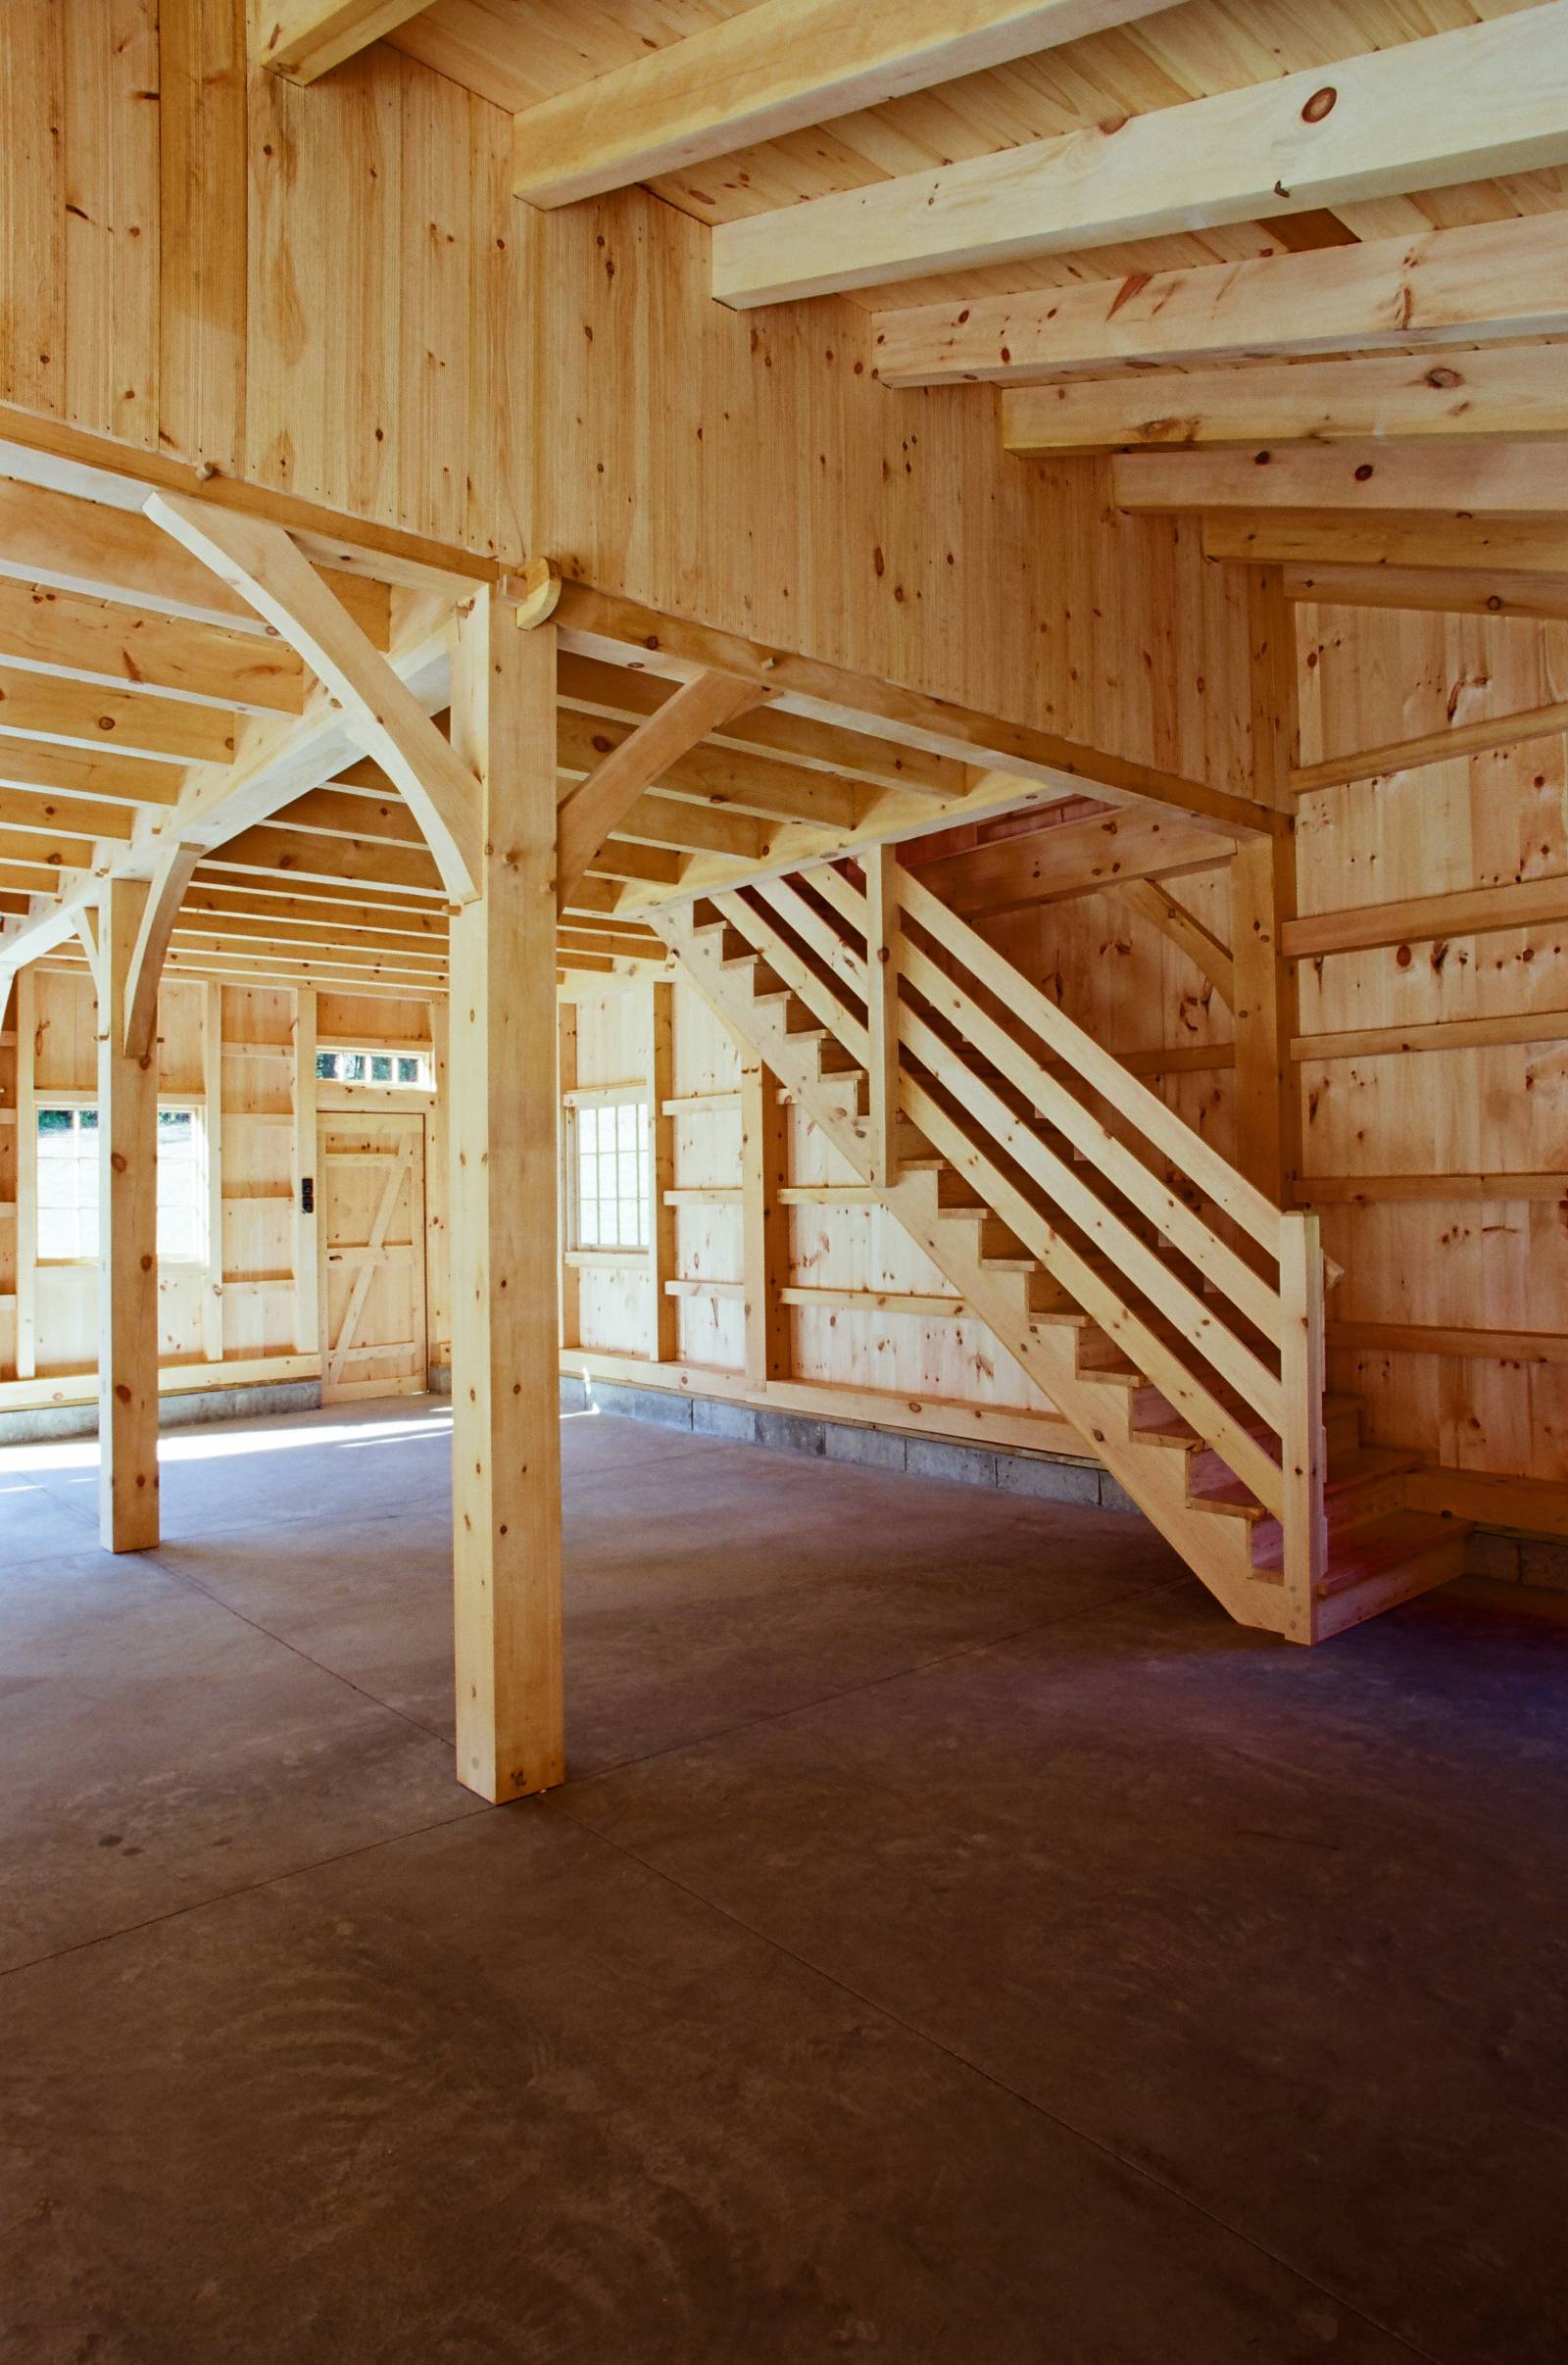 Anchorbeam Joinery •Â Arched Braces •Â Heavy Timber Pine Stairway to Second Floor